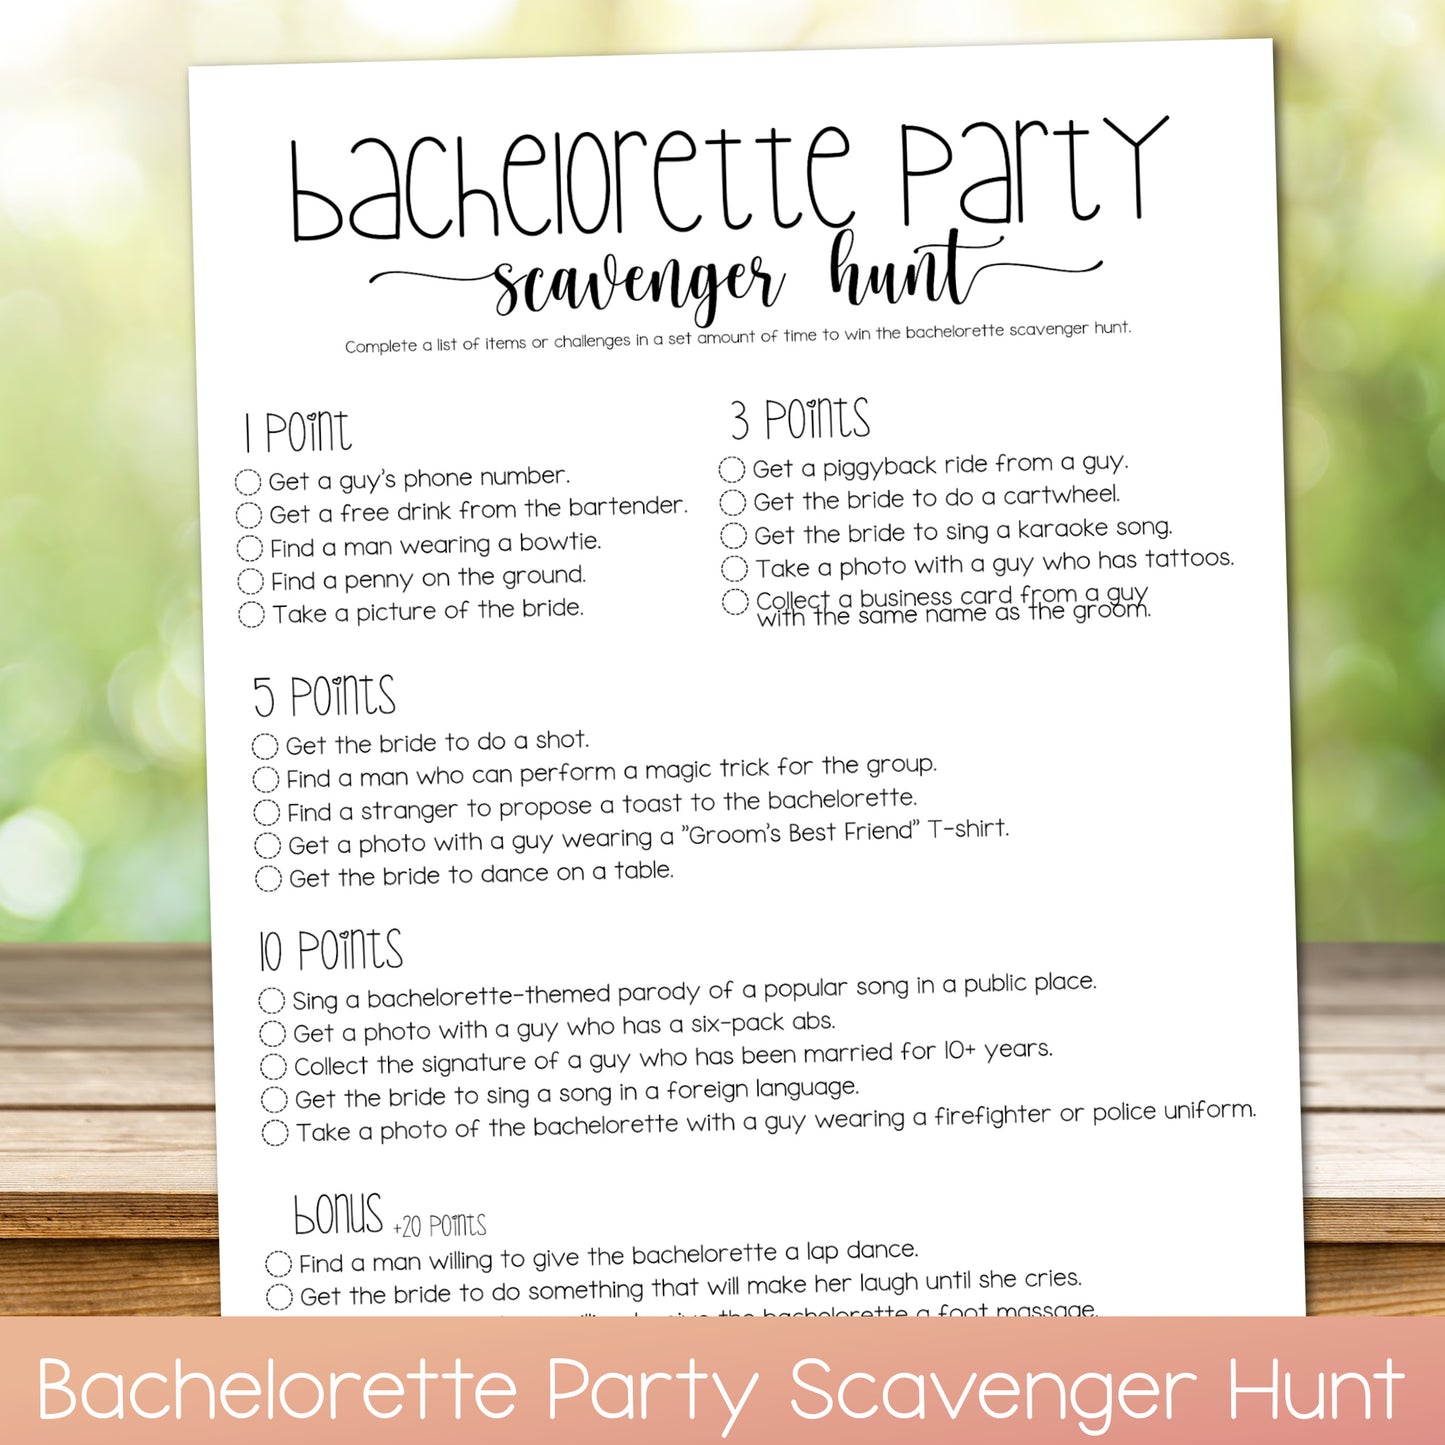 Unleash the Fun with an Exciting Bachelorette Party Scavenger Hunt